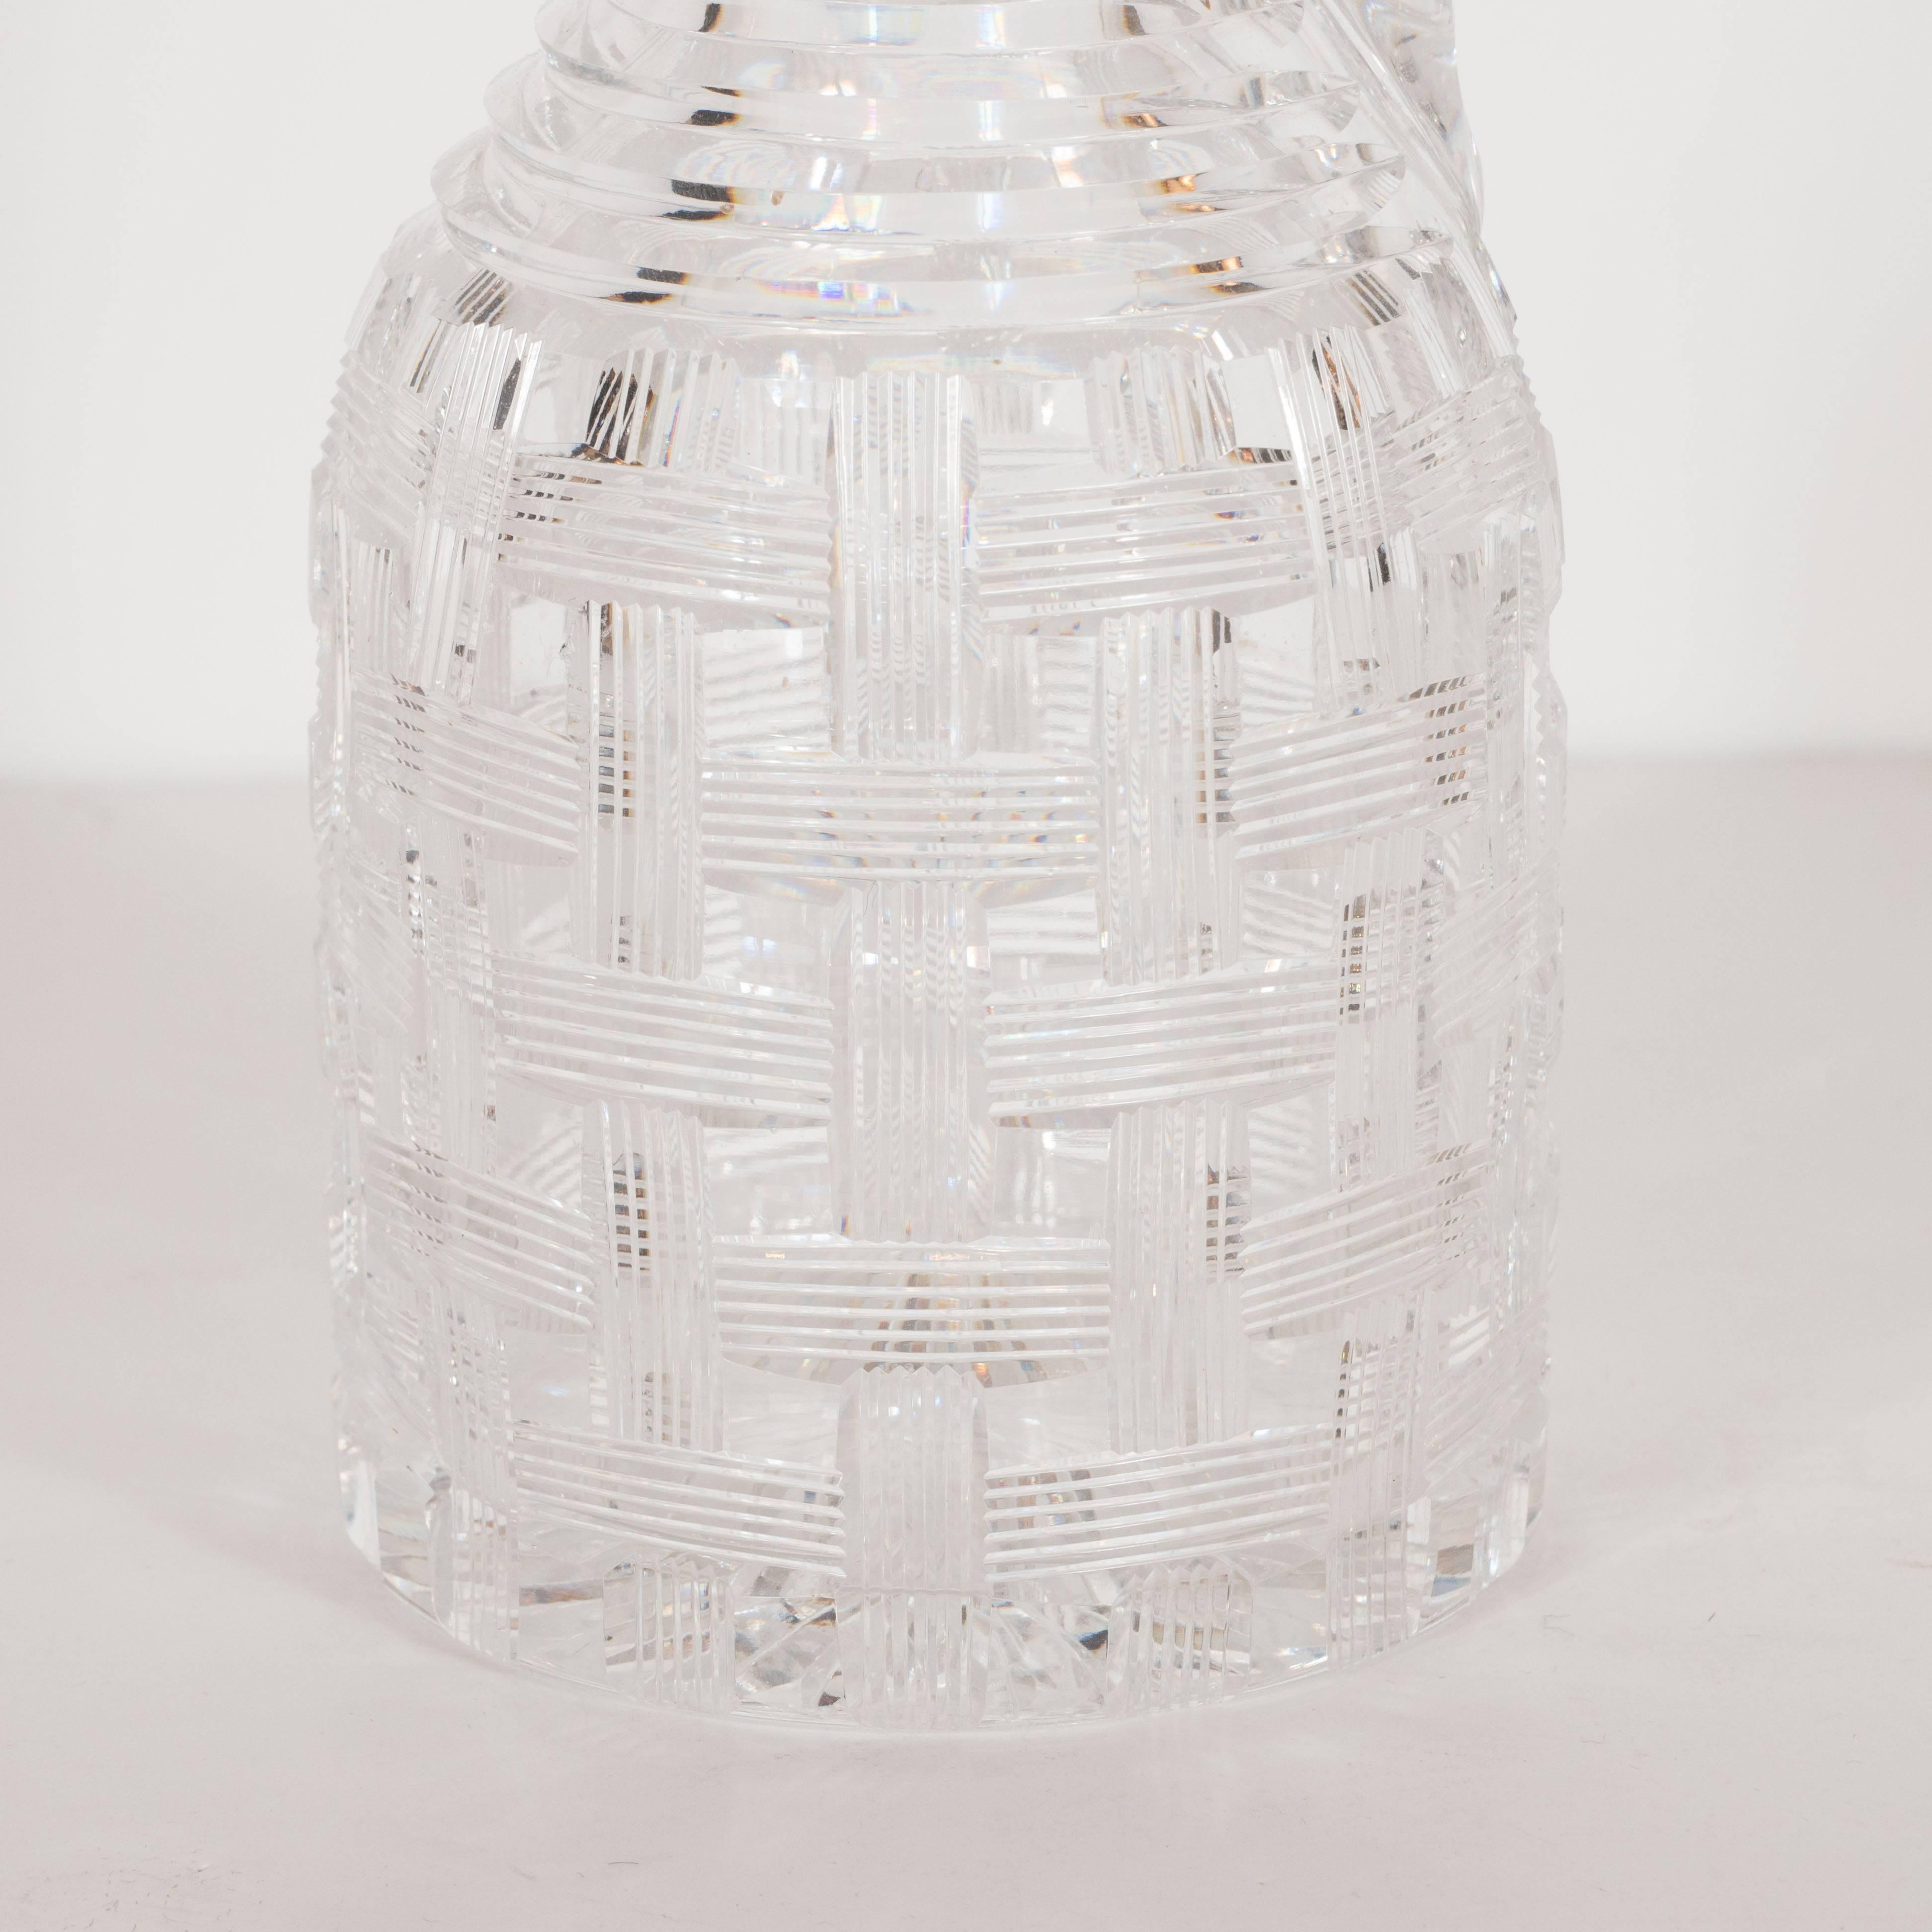 Late 19th Century Antique American Brilliant Cut Glass Decanter with Basketweave Detailing